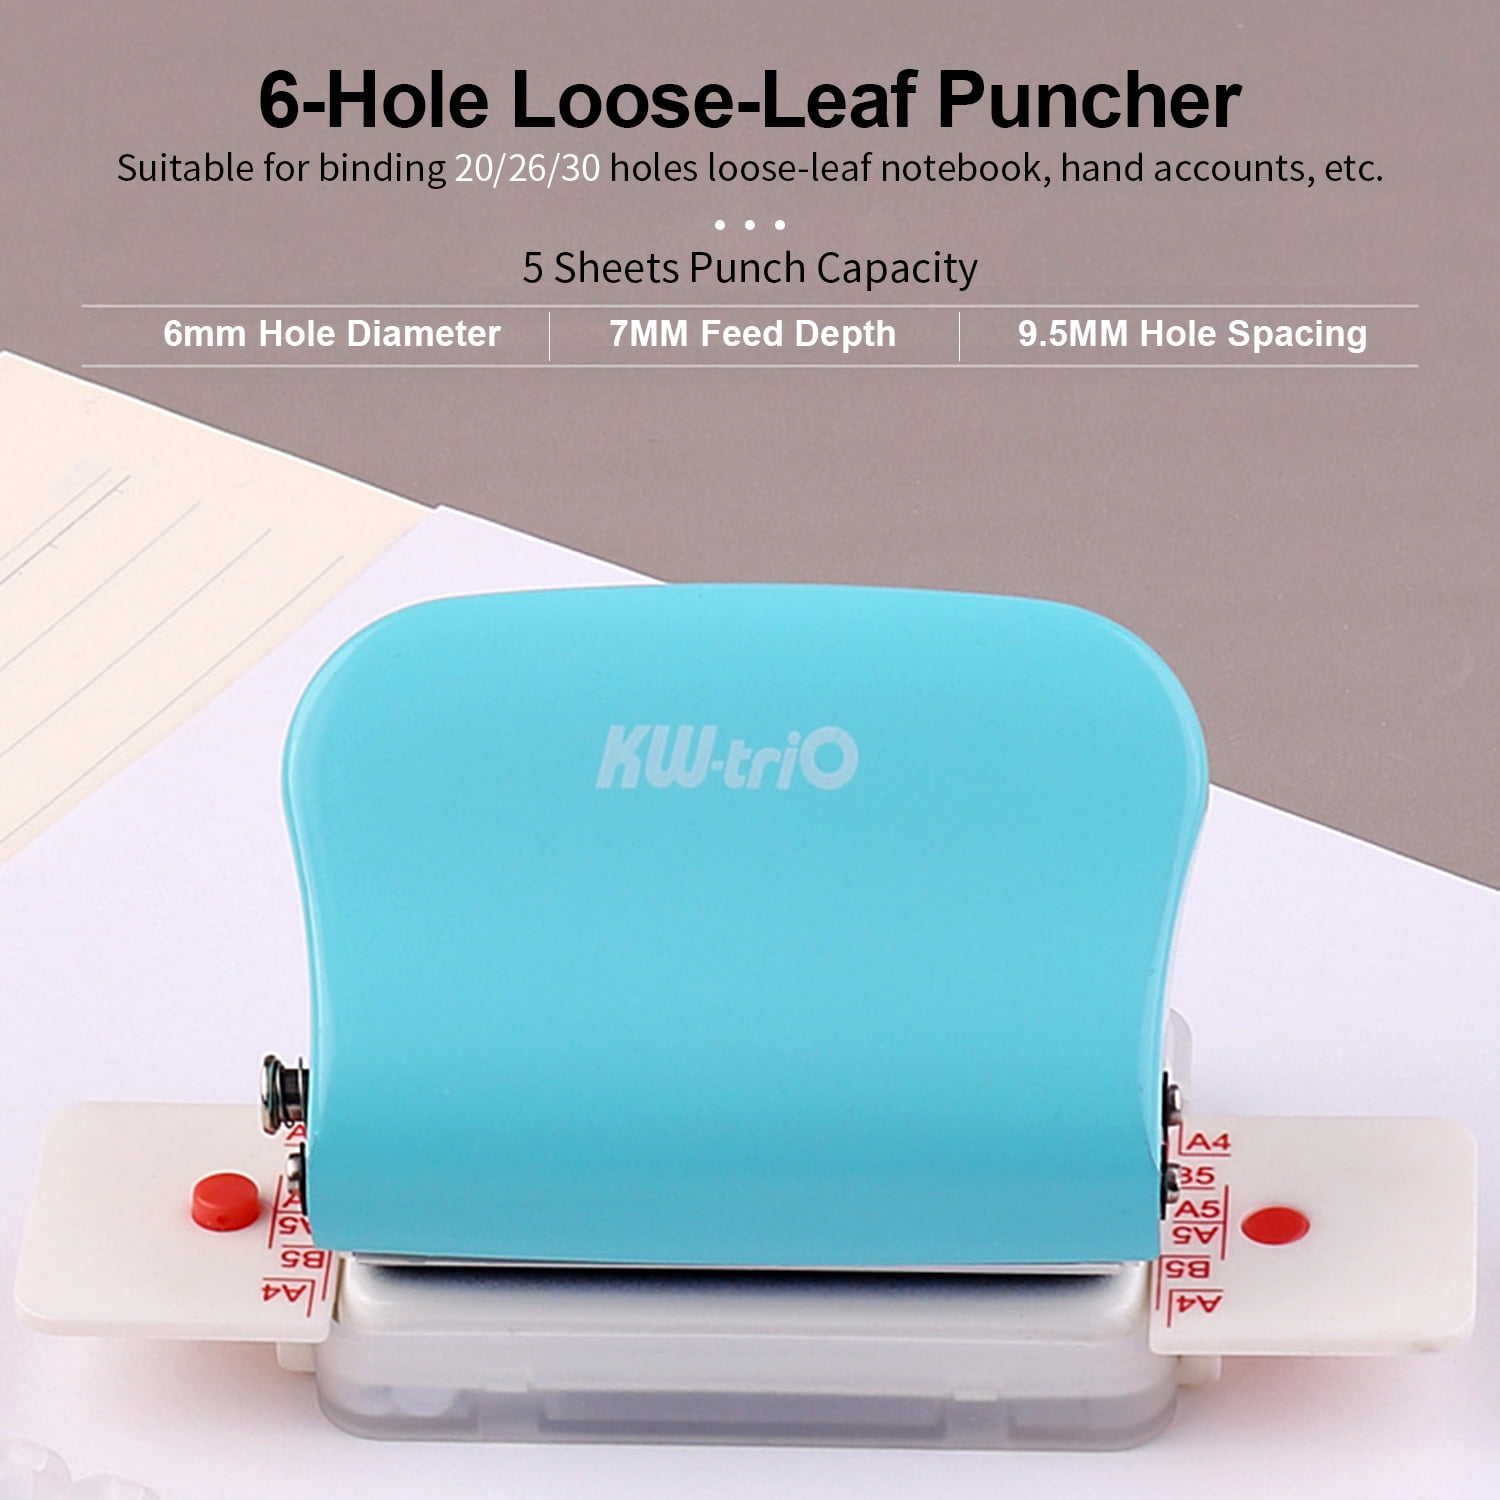 Decoe 6-Hole Paper Punch Handheld Metal Hole Puncher 5 Sheet Capacity 6mm for A4 A5 B5 Notebook Scrapbook Diary Planner